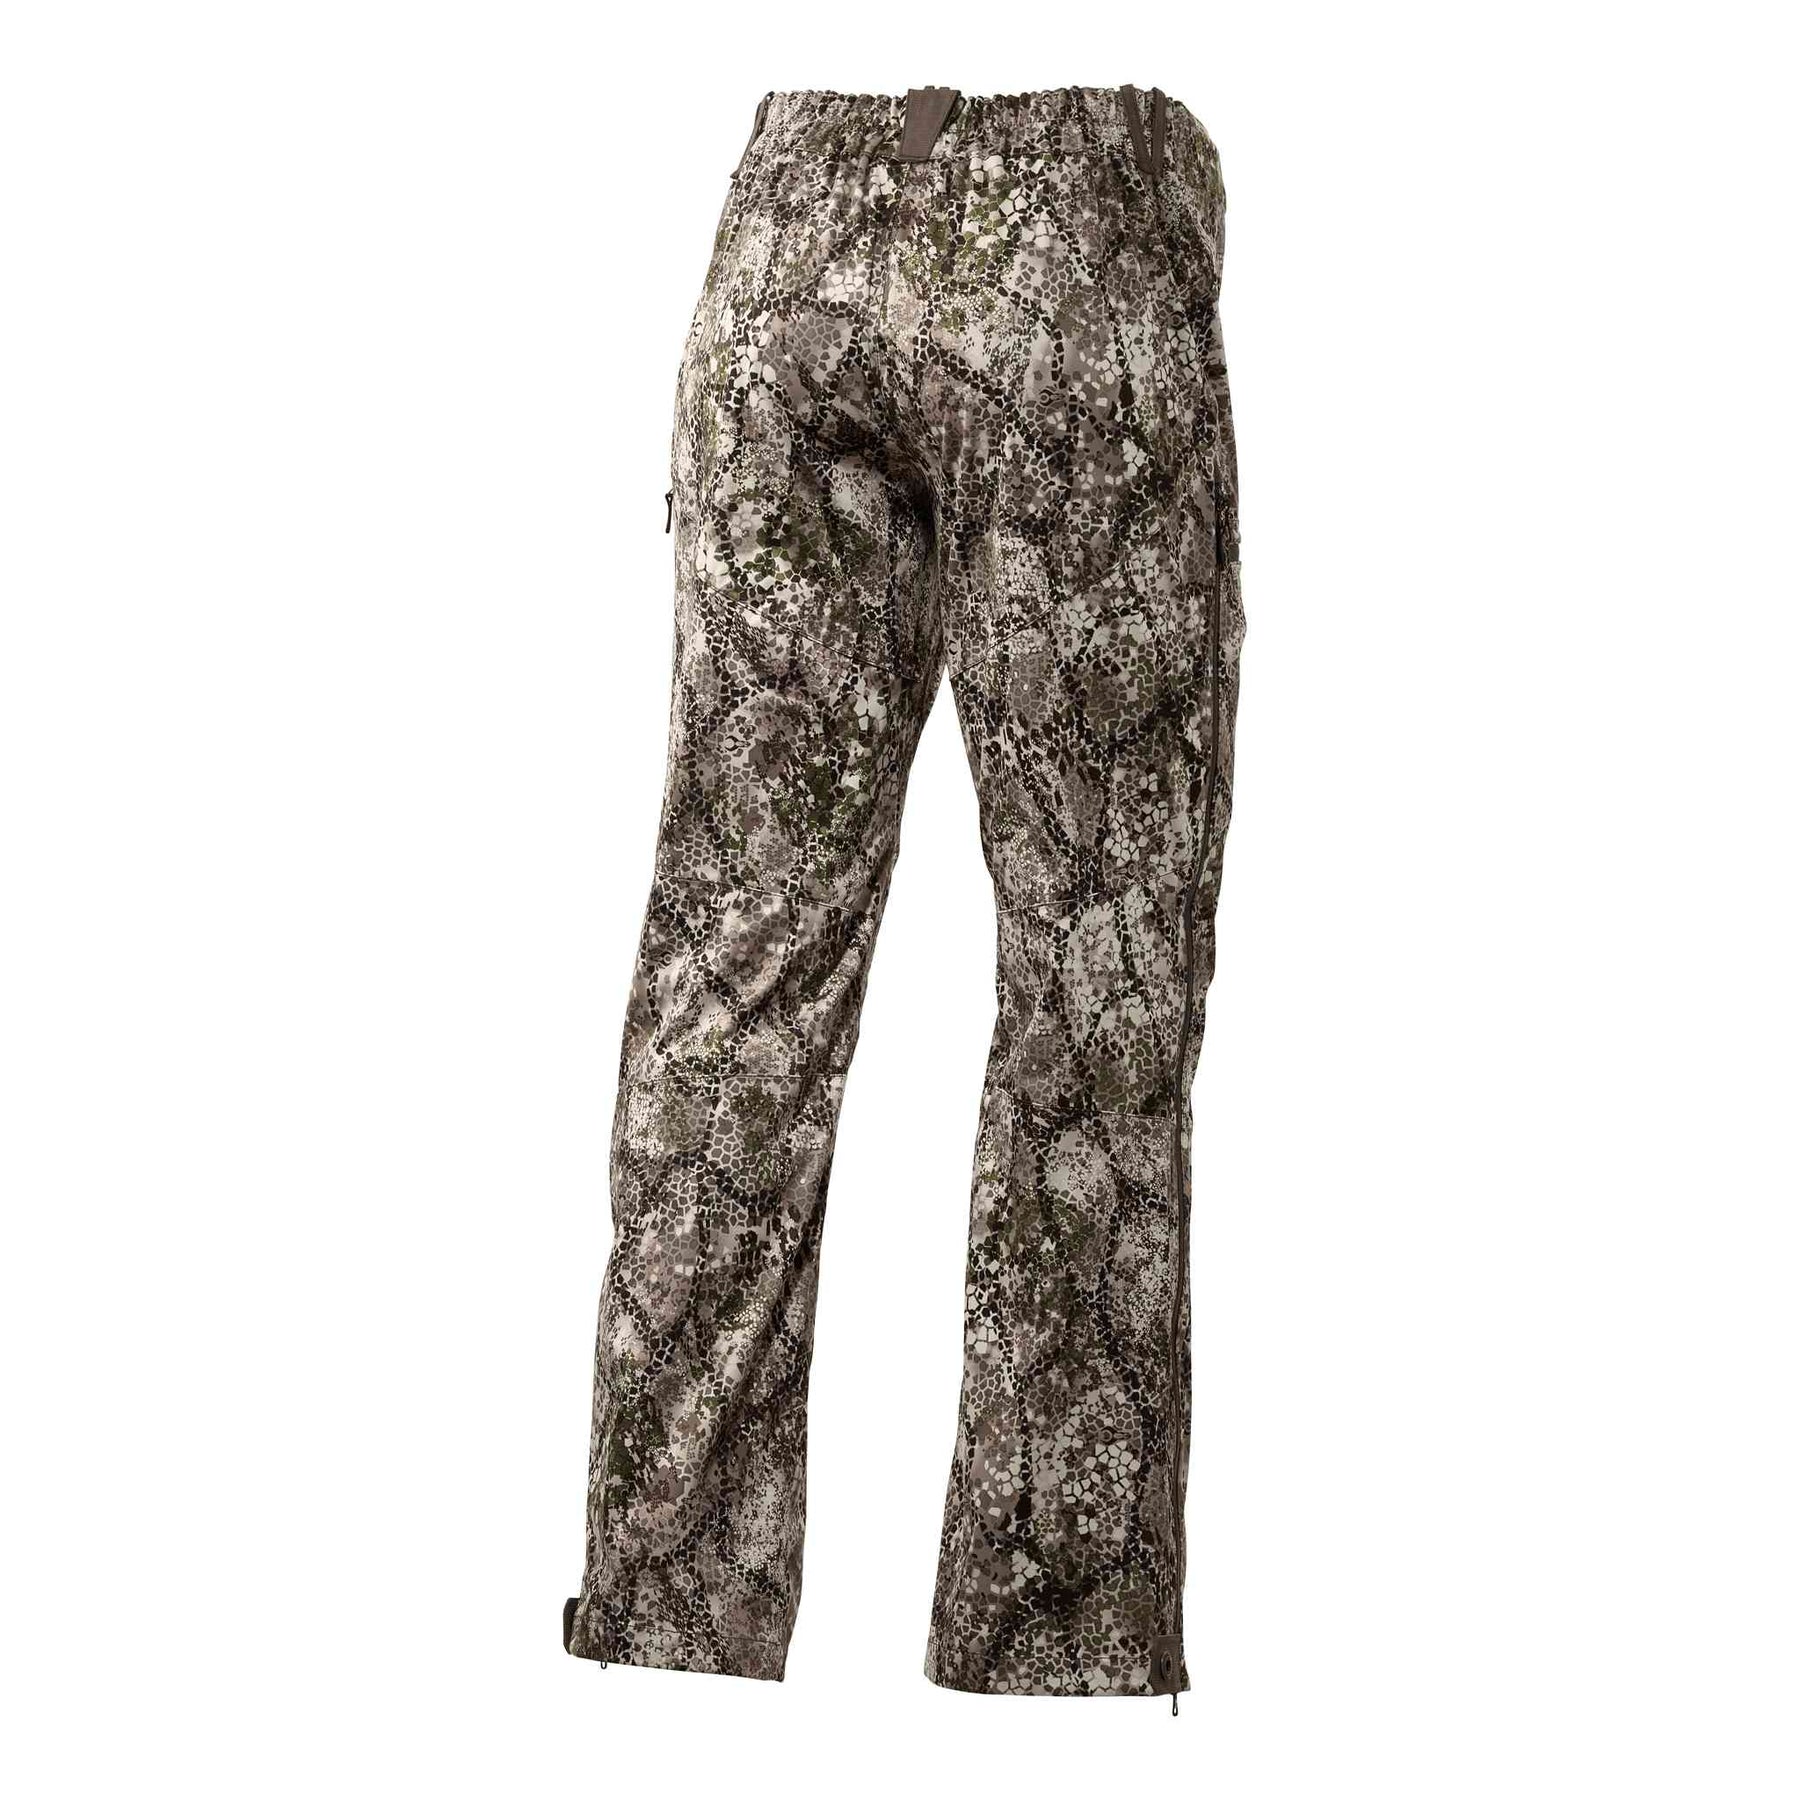 Badlands Exo Pant Approach-X-Large - 1